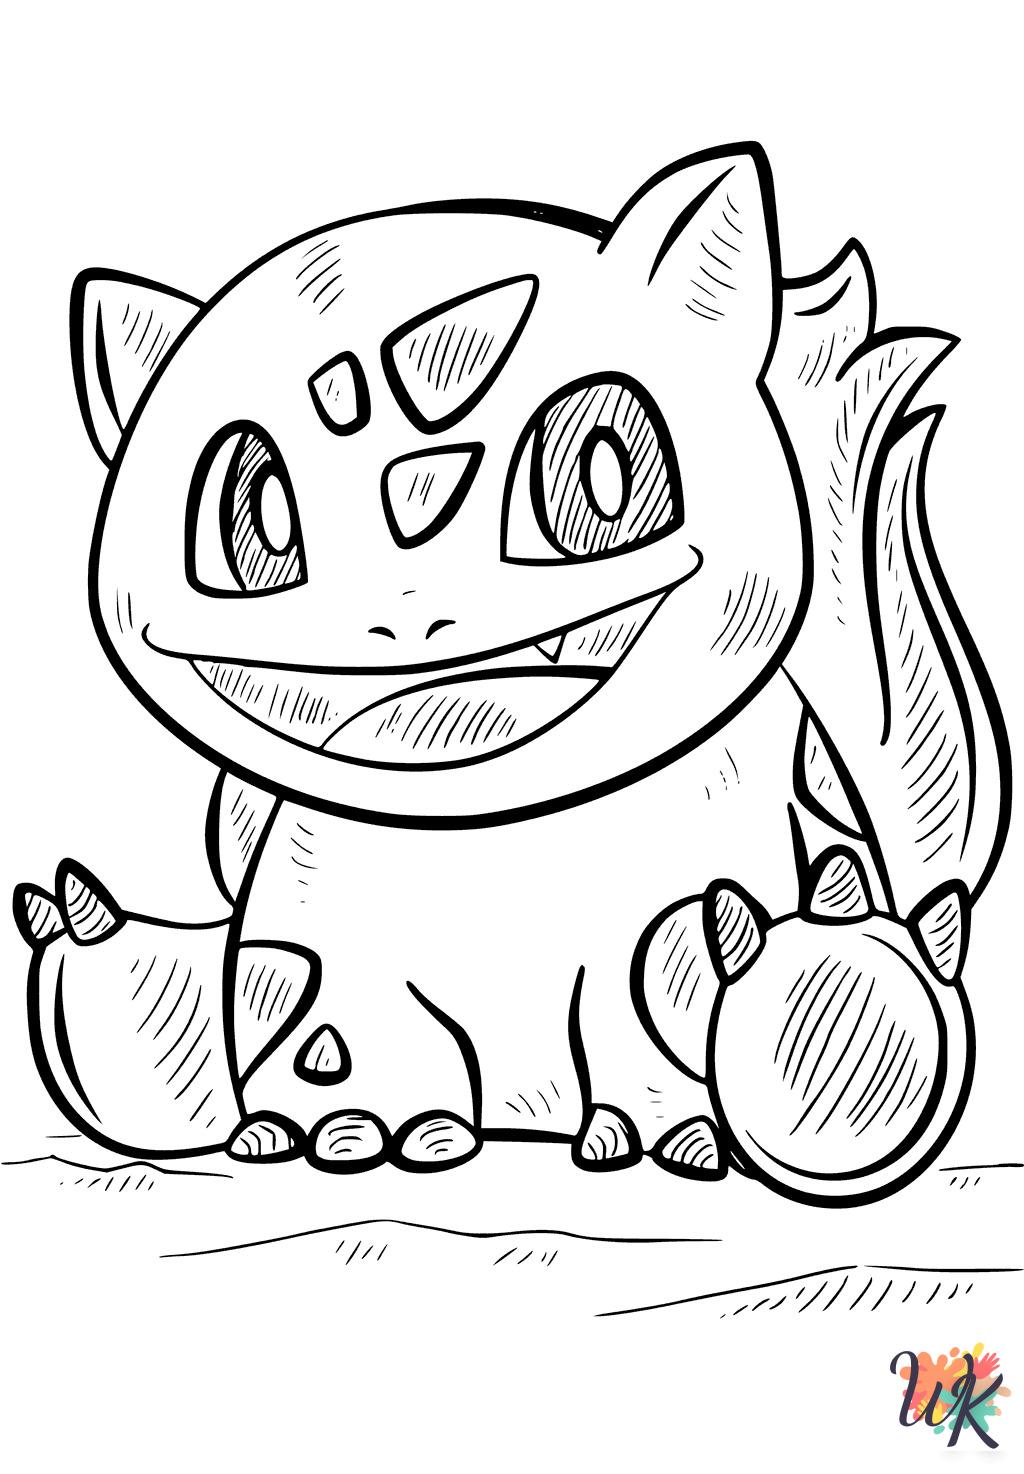 Bulbasaur coloring pages printable